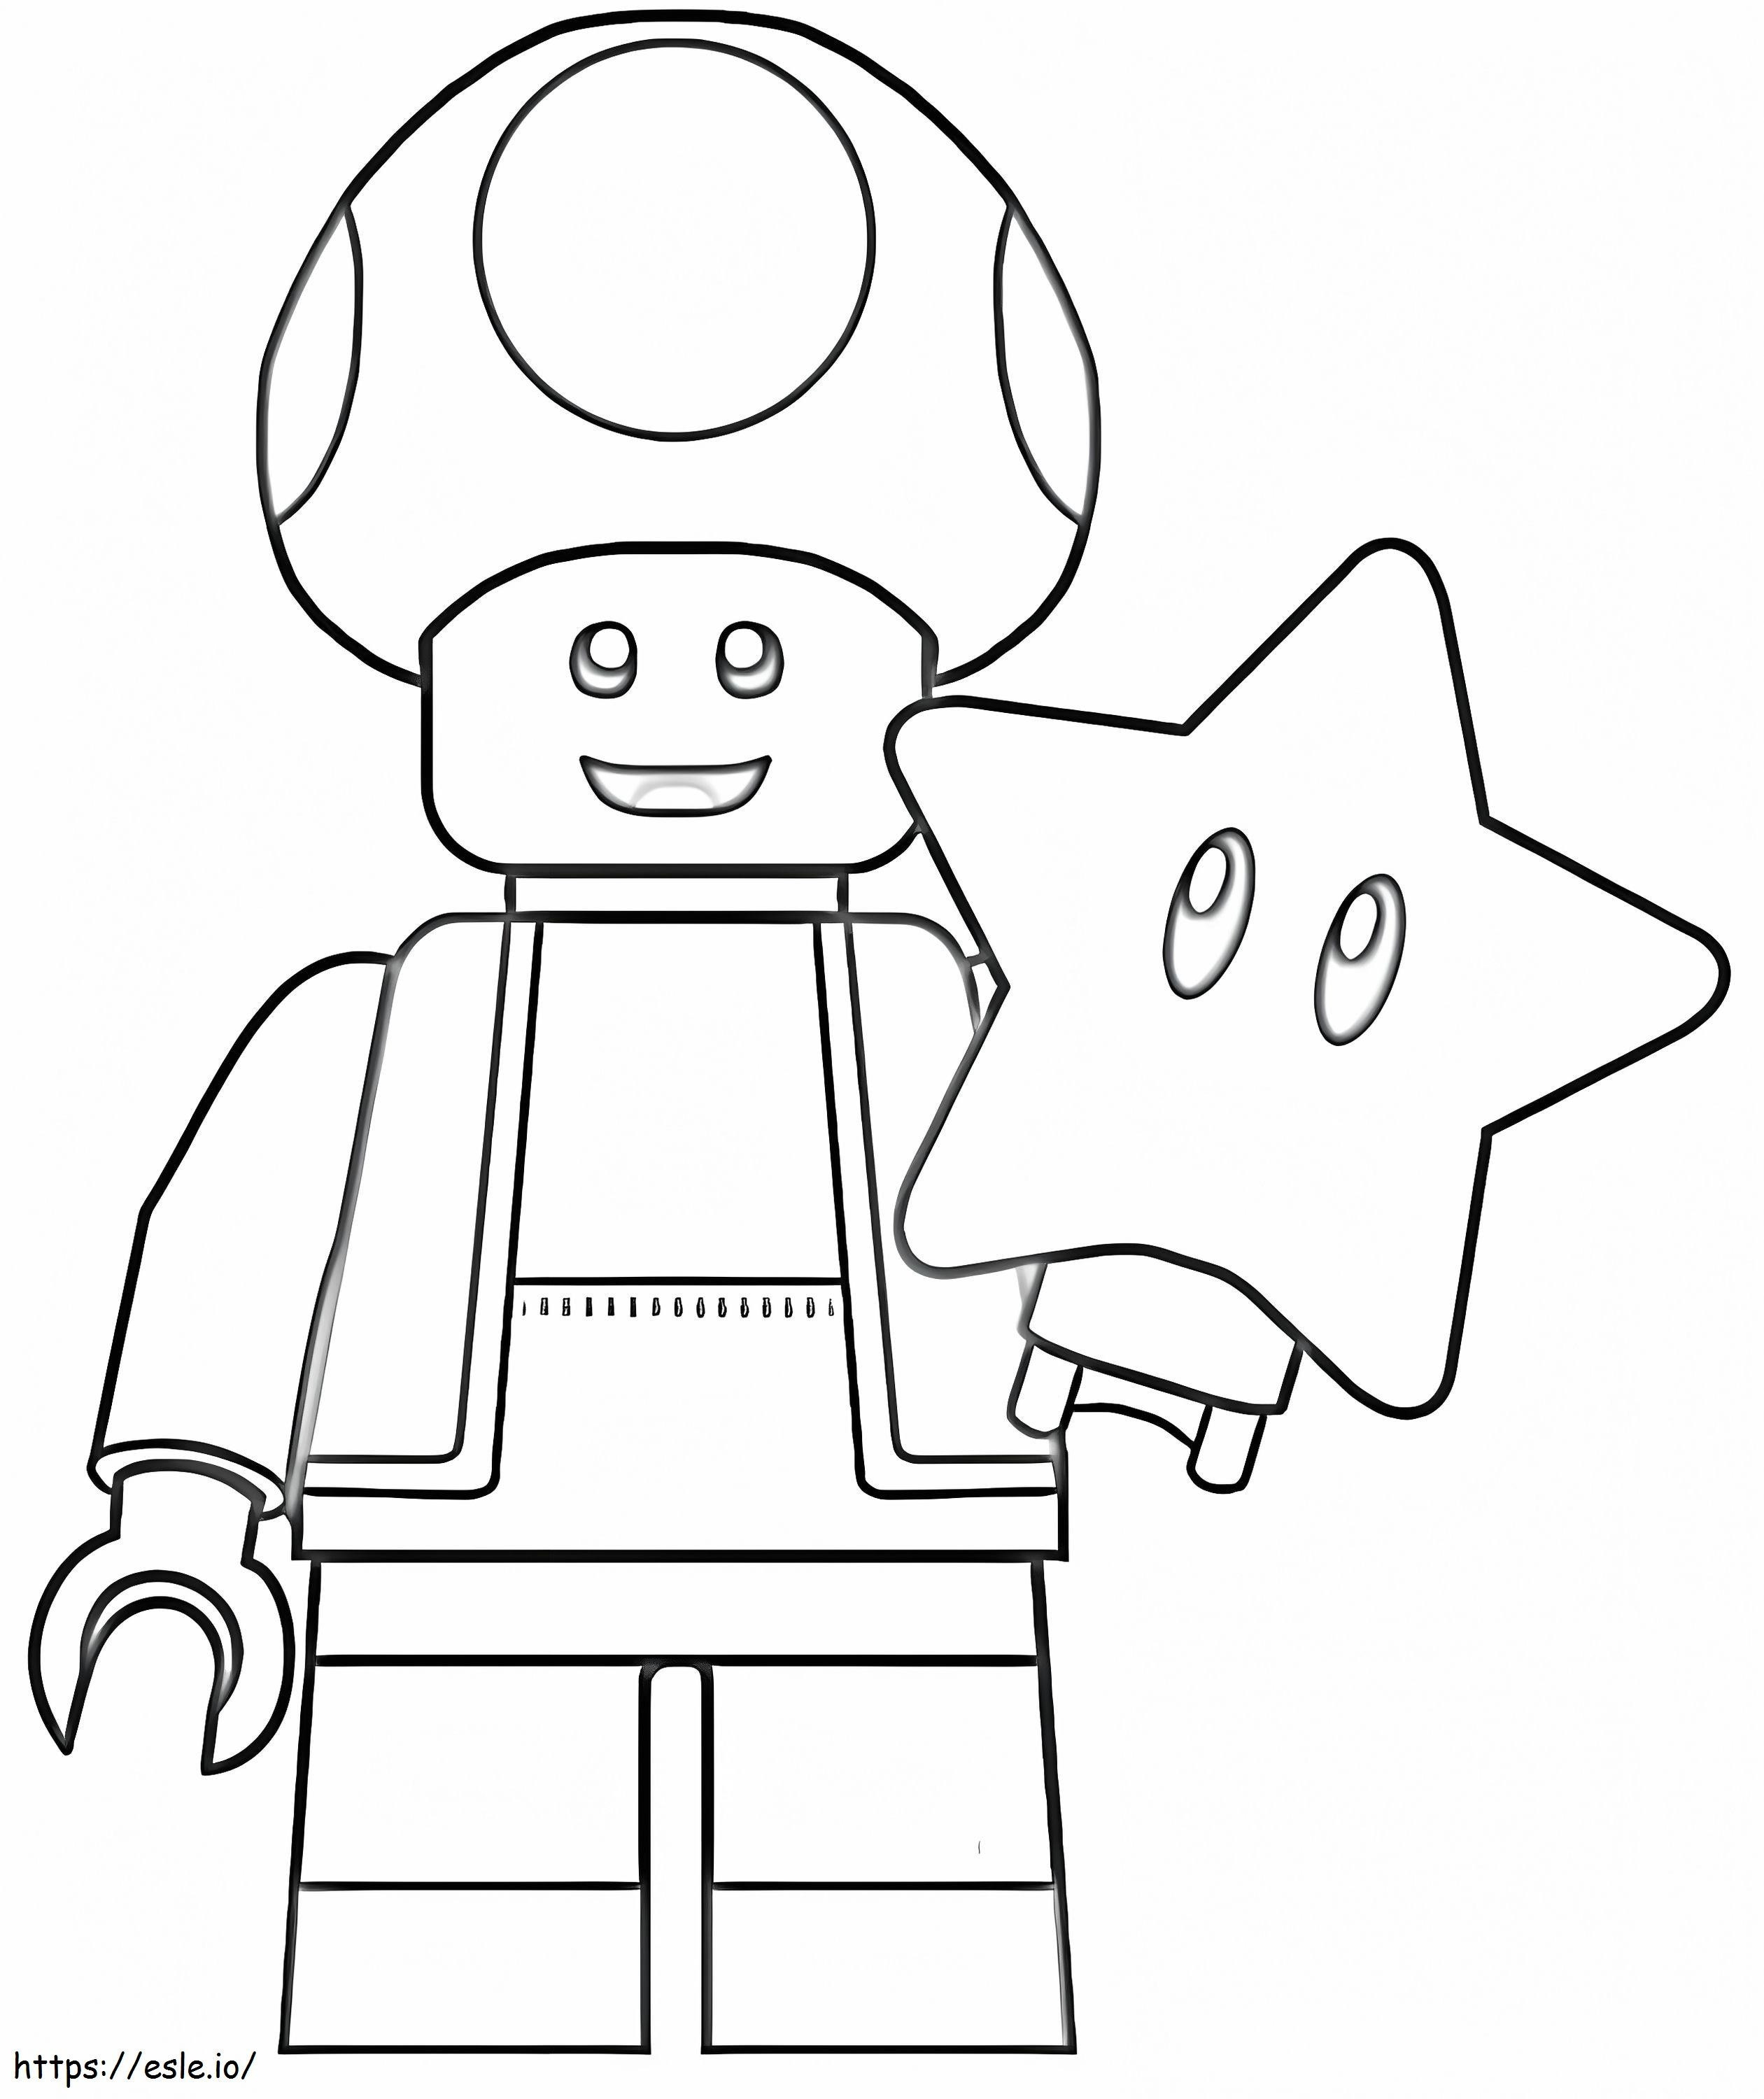 Lego Toad coloring page